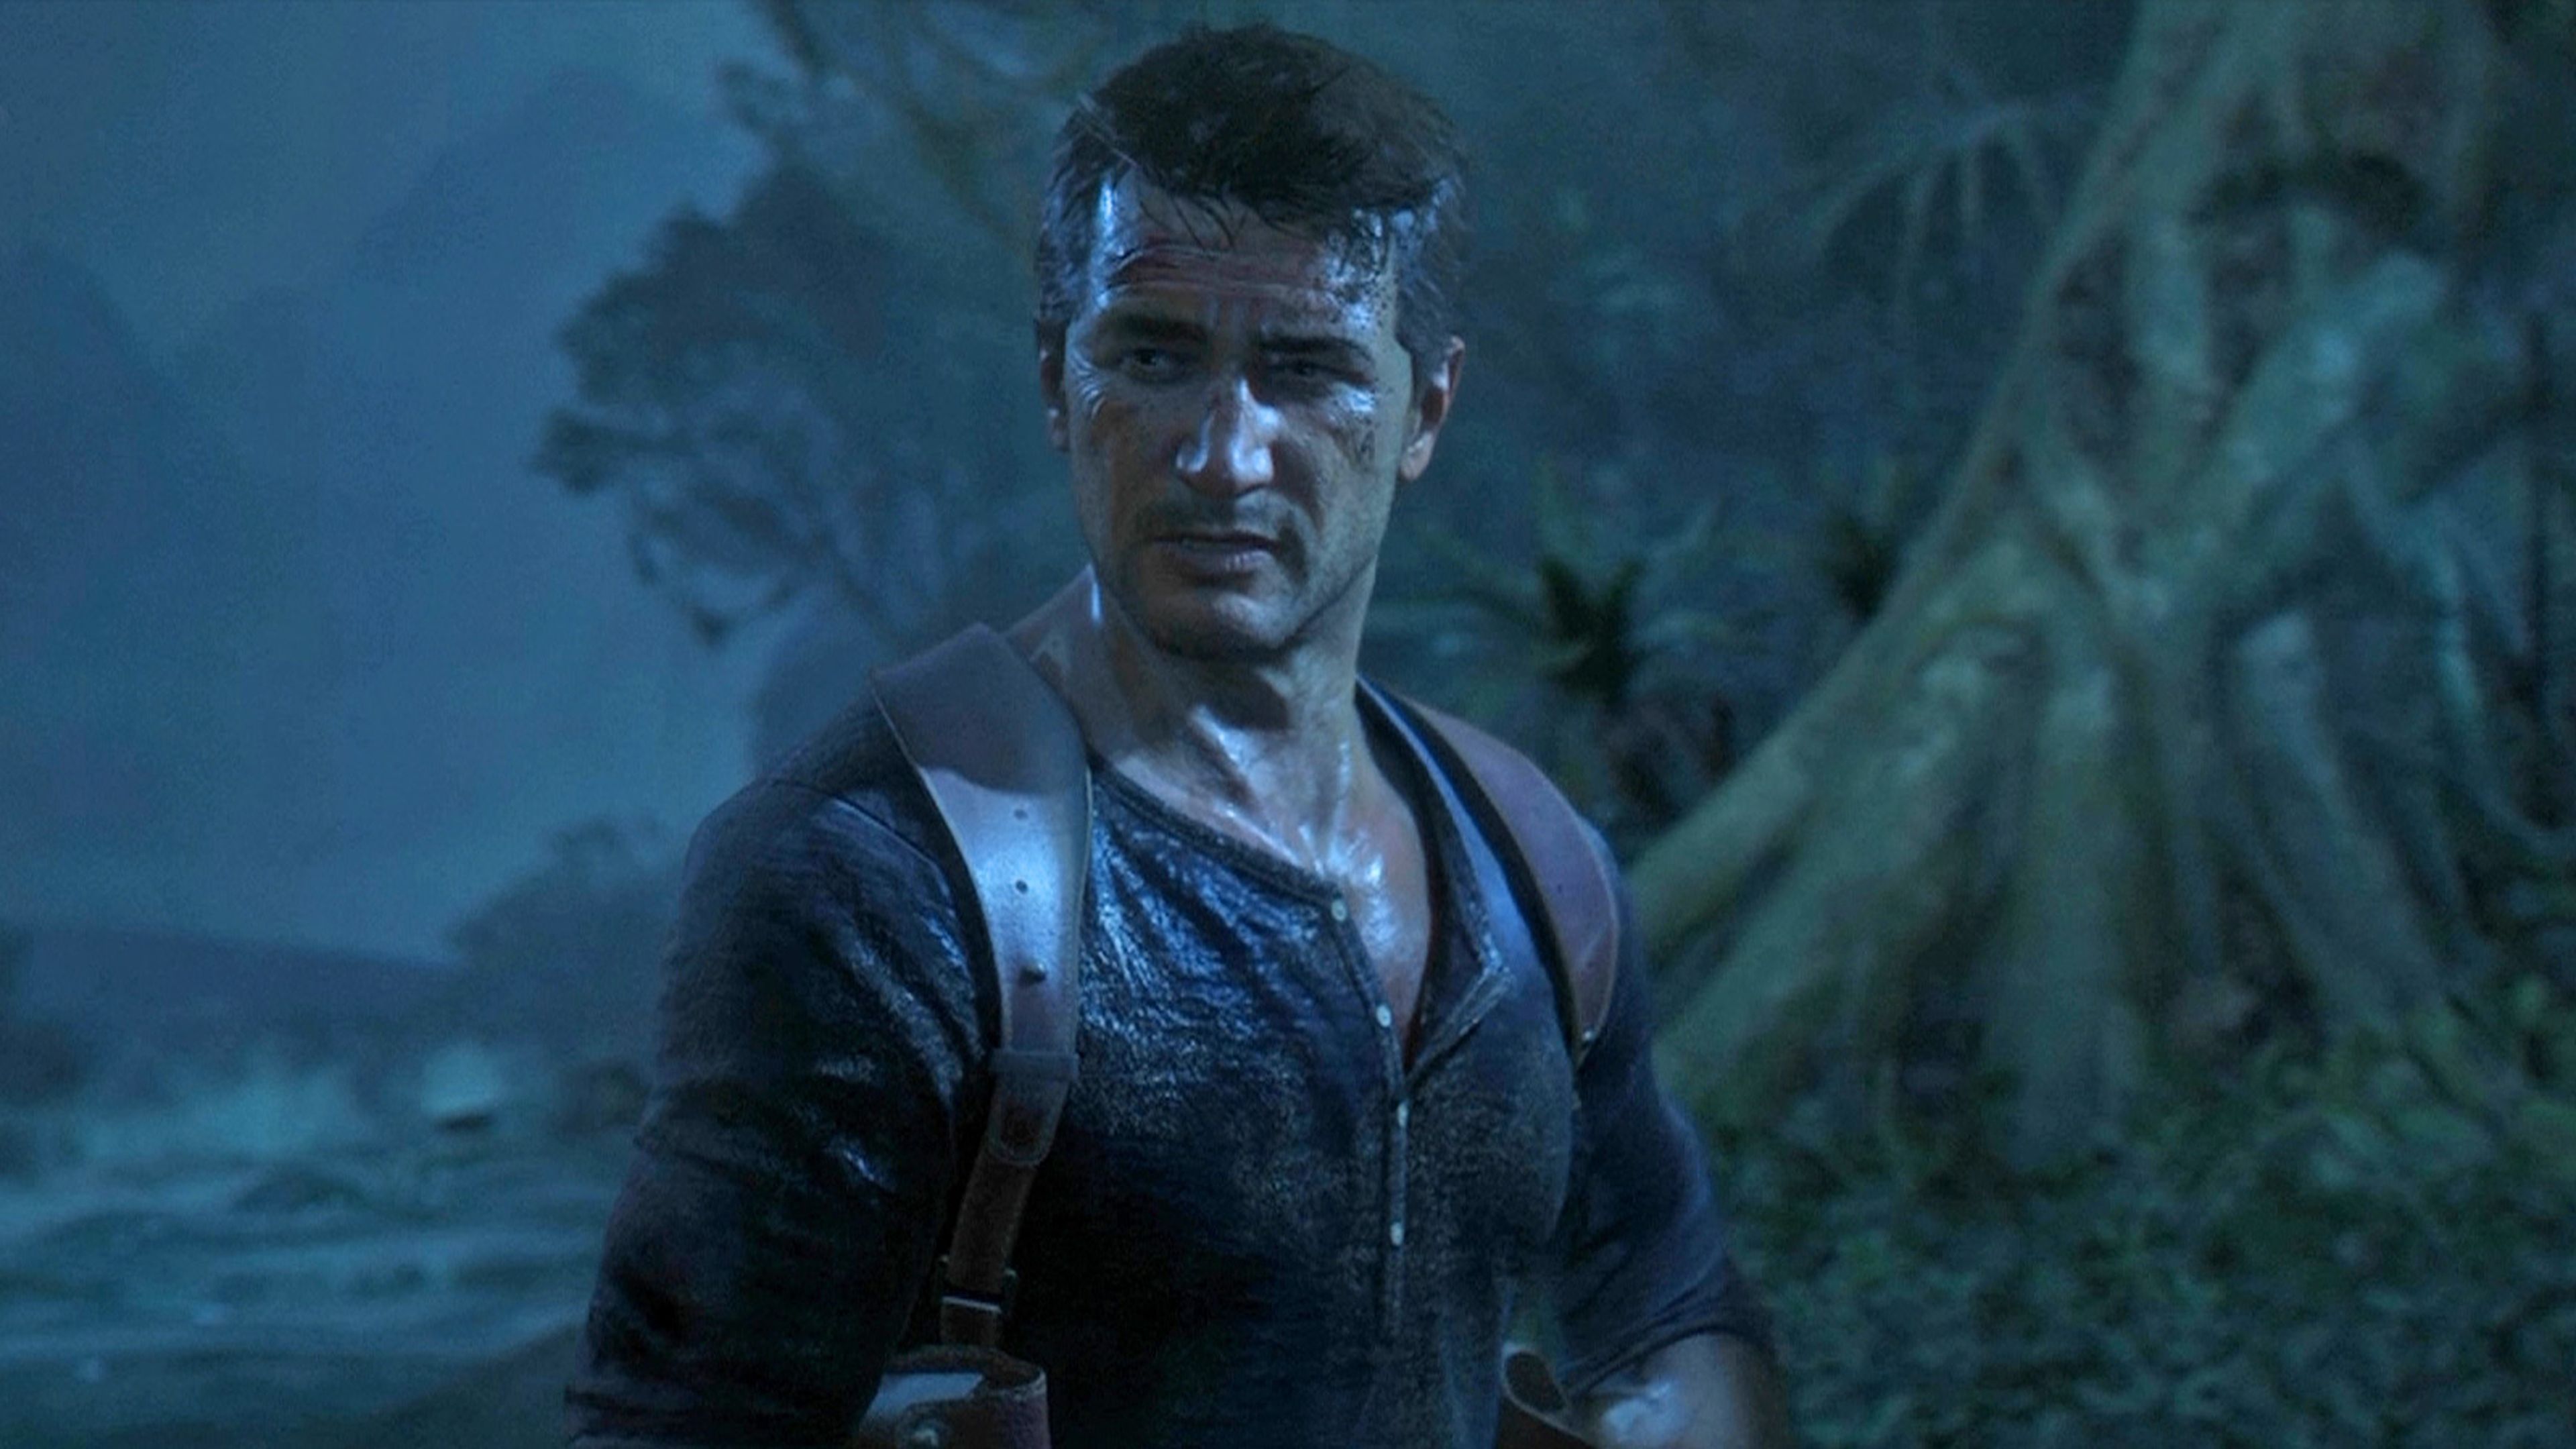 Naughty Dog compara Uncharted 4 con The Last of Us